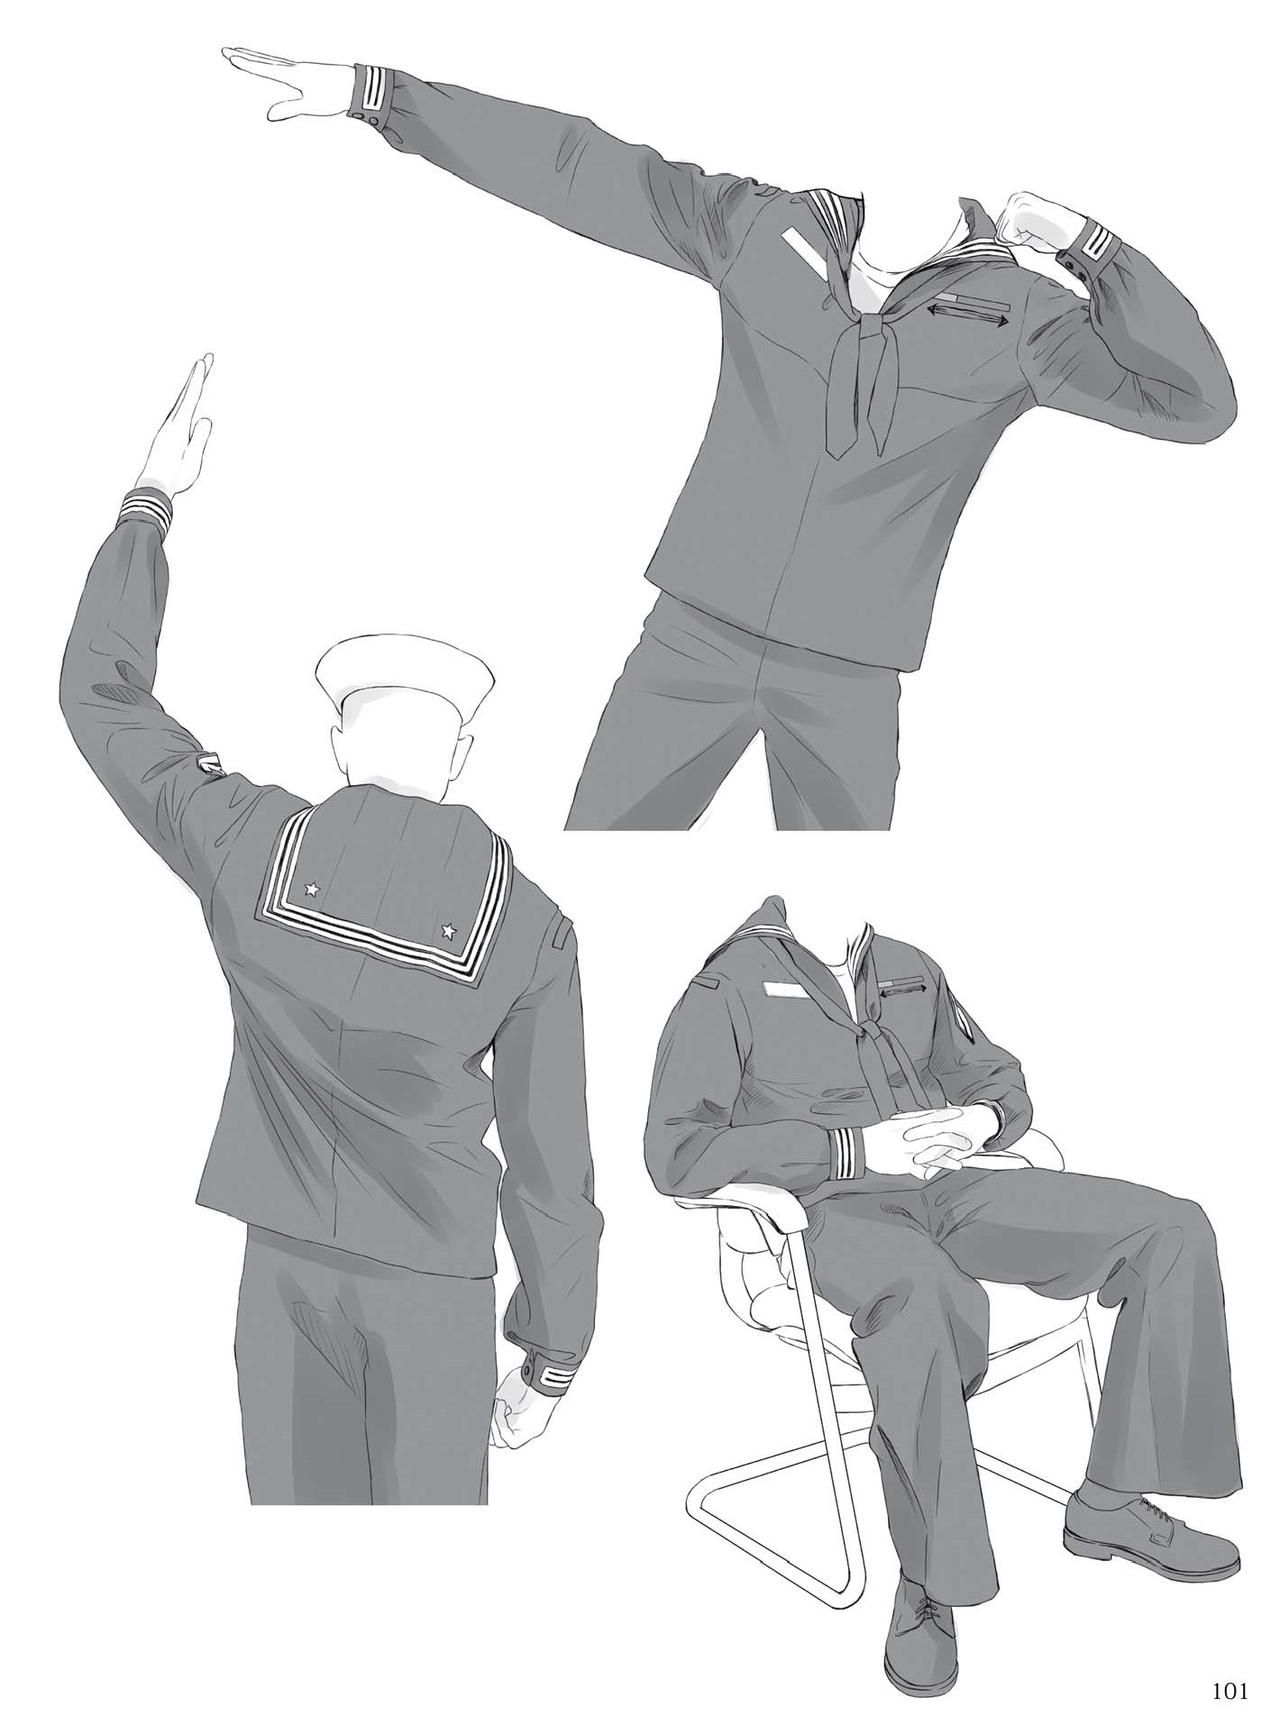 How to draw military uniforms and uniforms From Self-Defense Forces 軍服・制服の描き方 アメリカ軍・自衛隊の制服から戦闘服まで 104